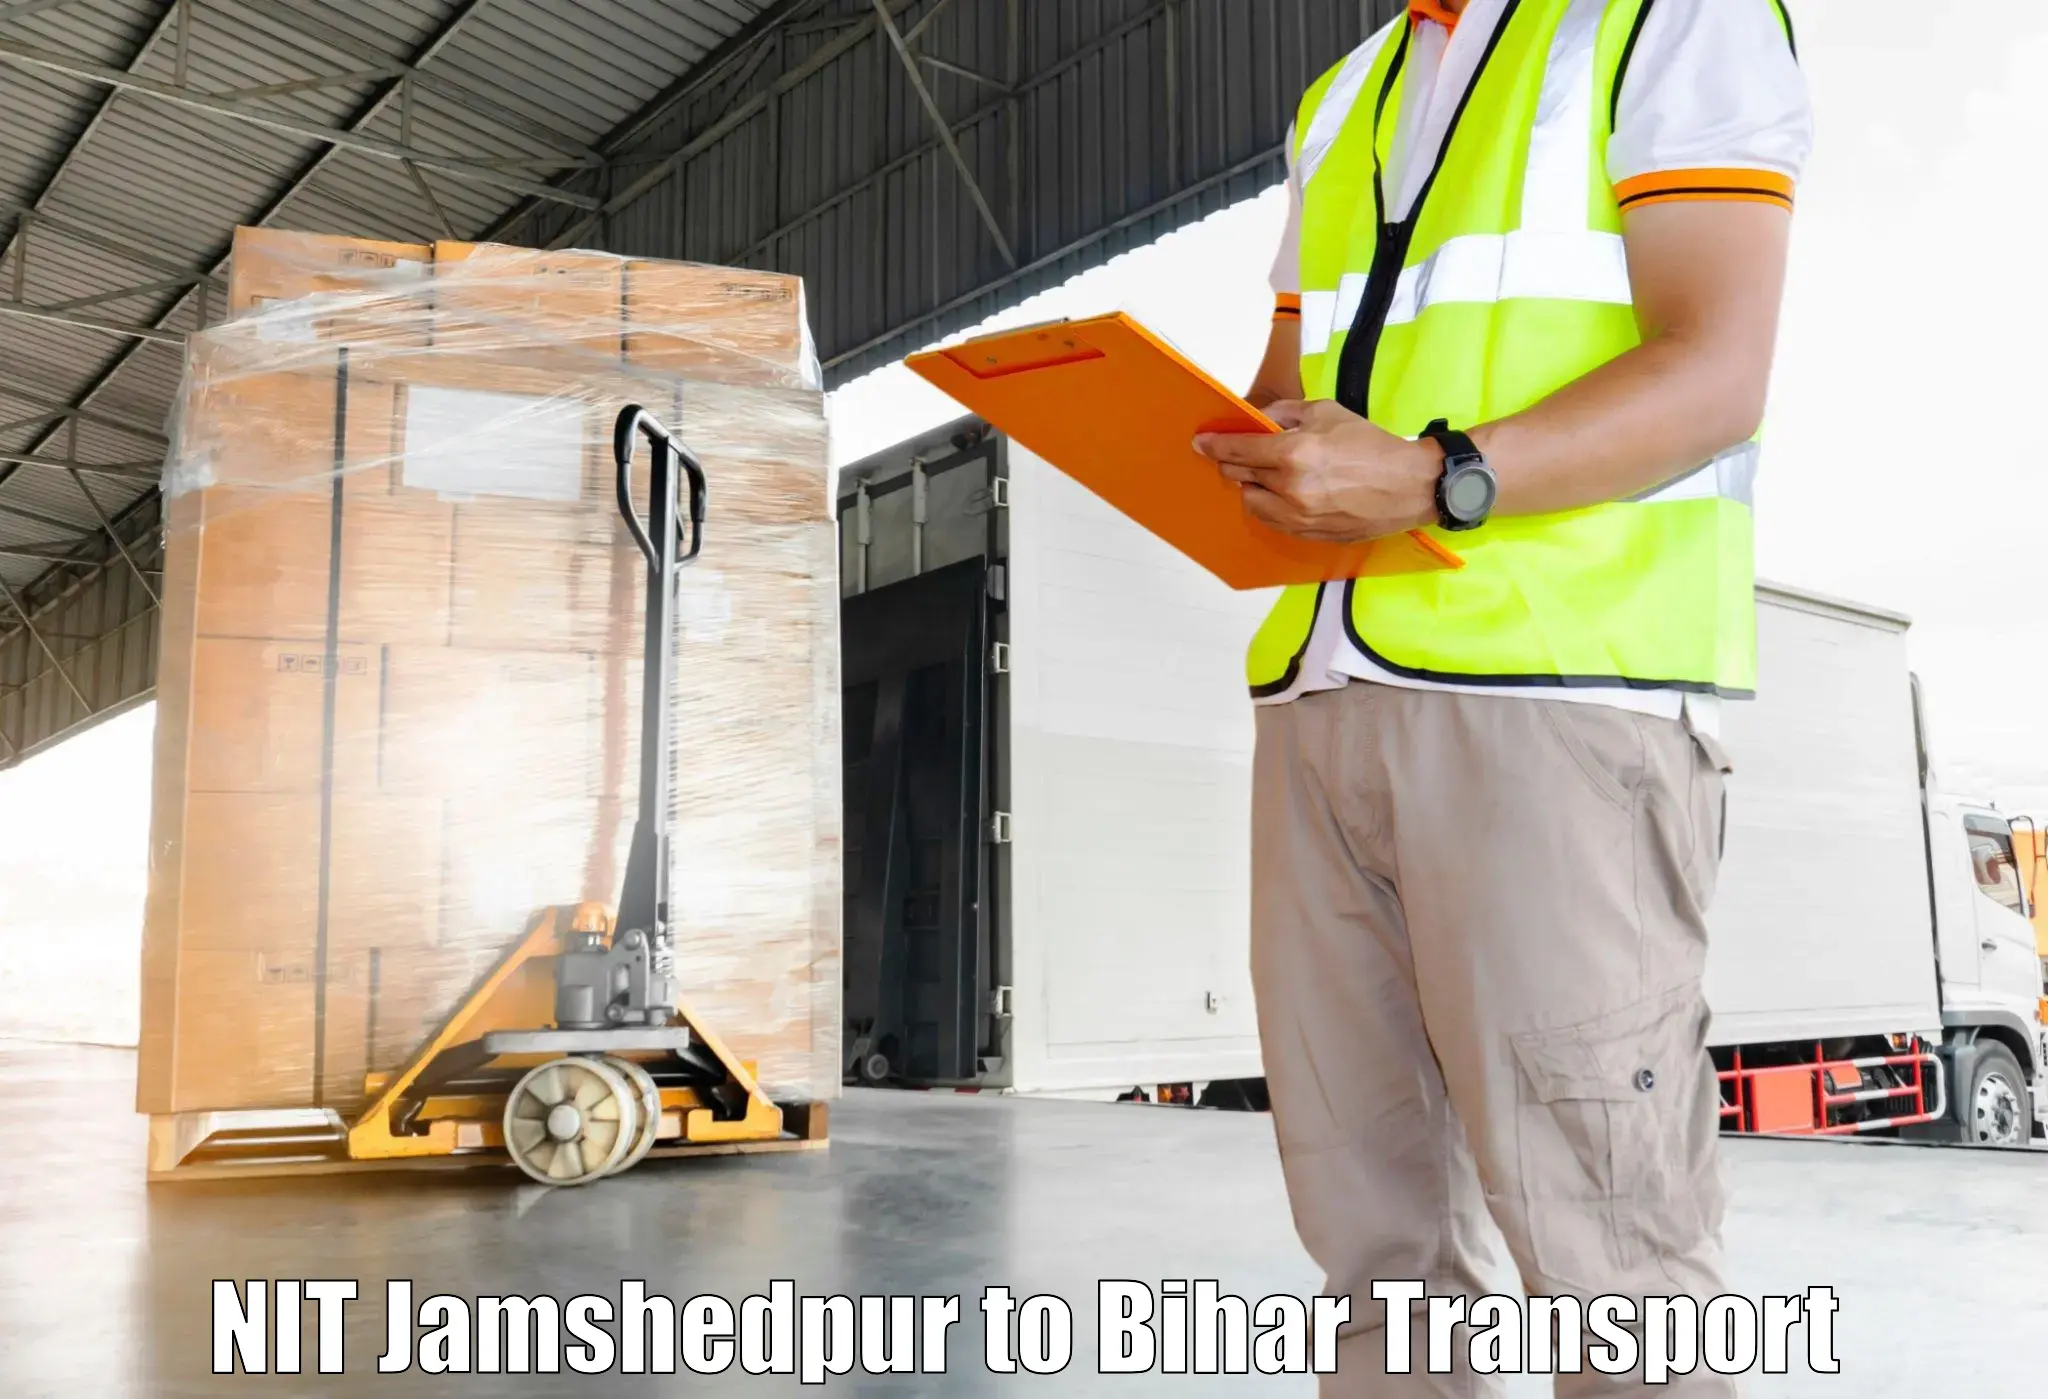 Cargo transport services NIT Jamshedpur to Rohtas